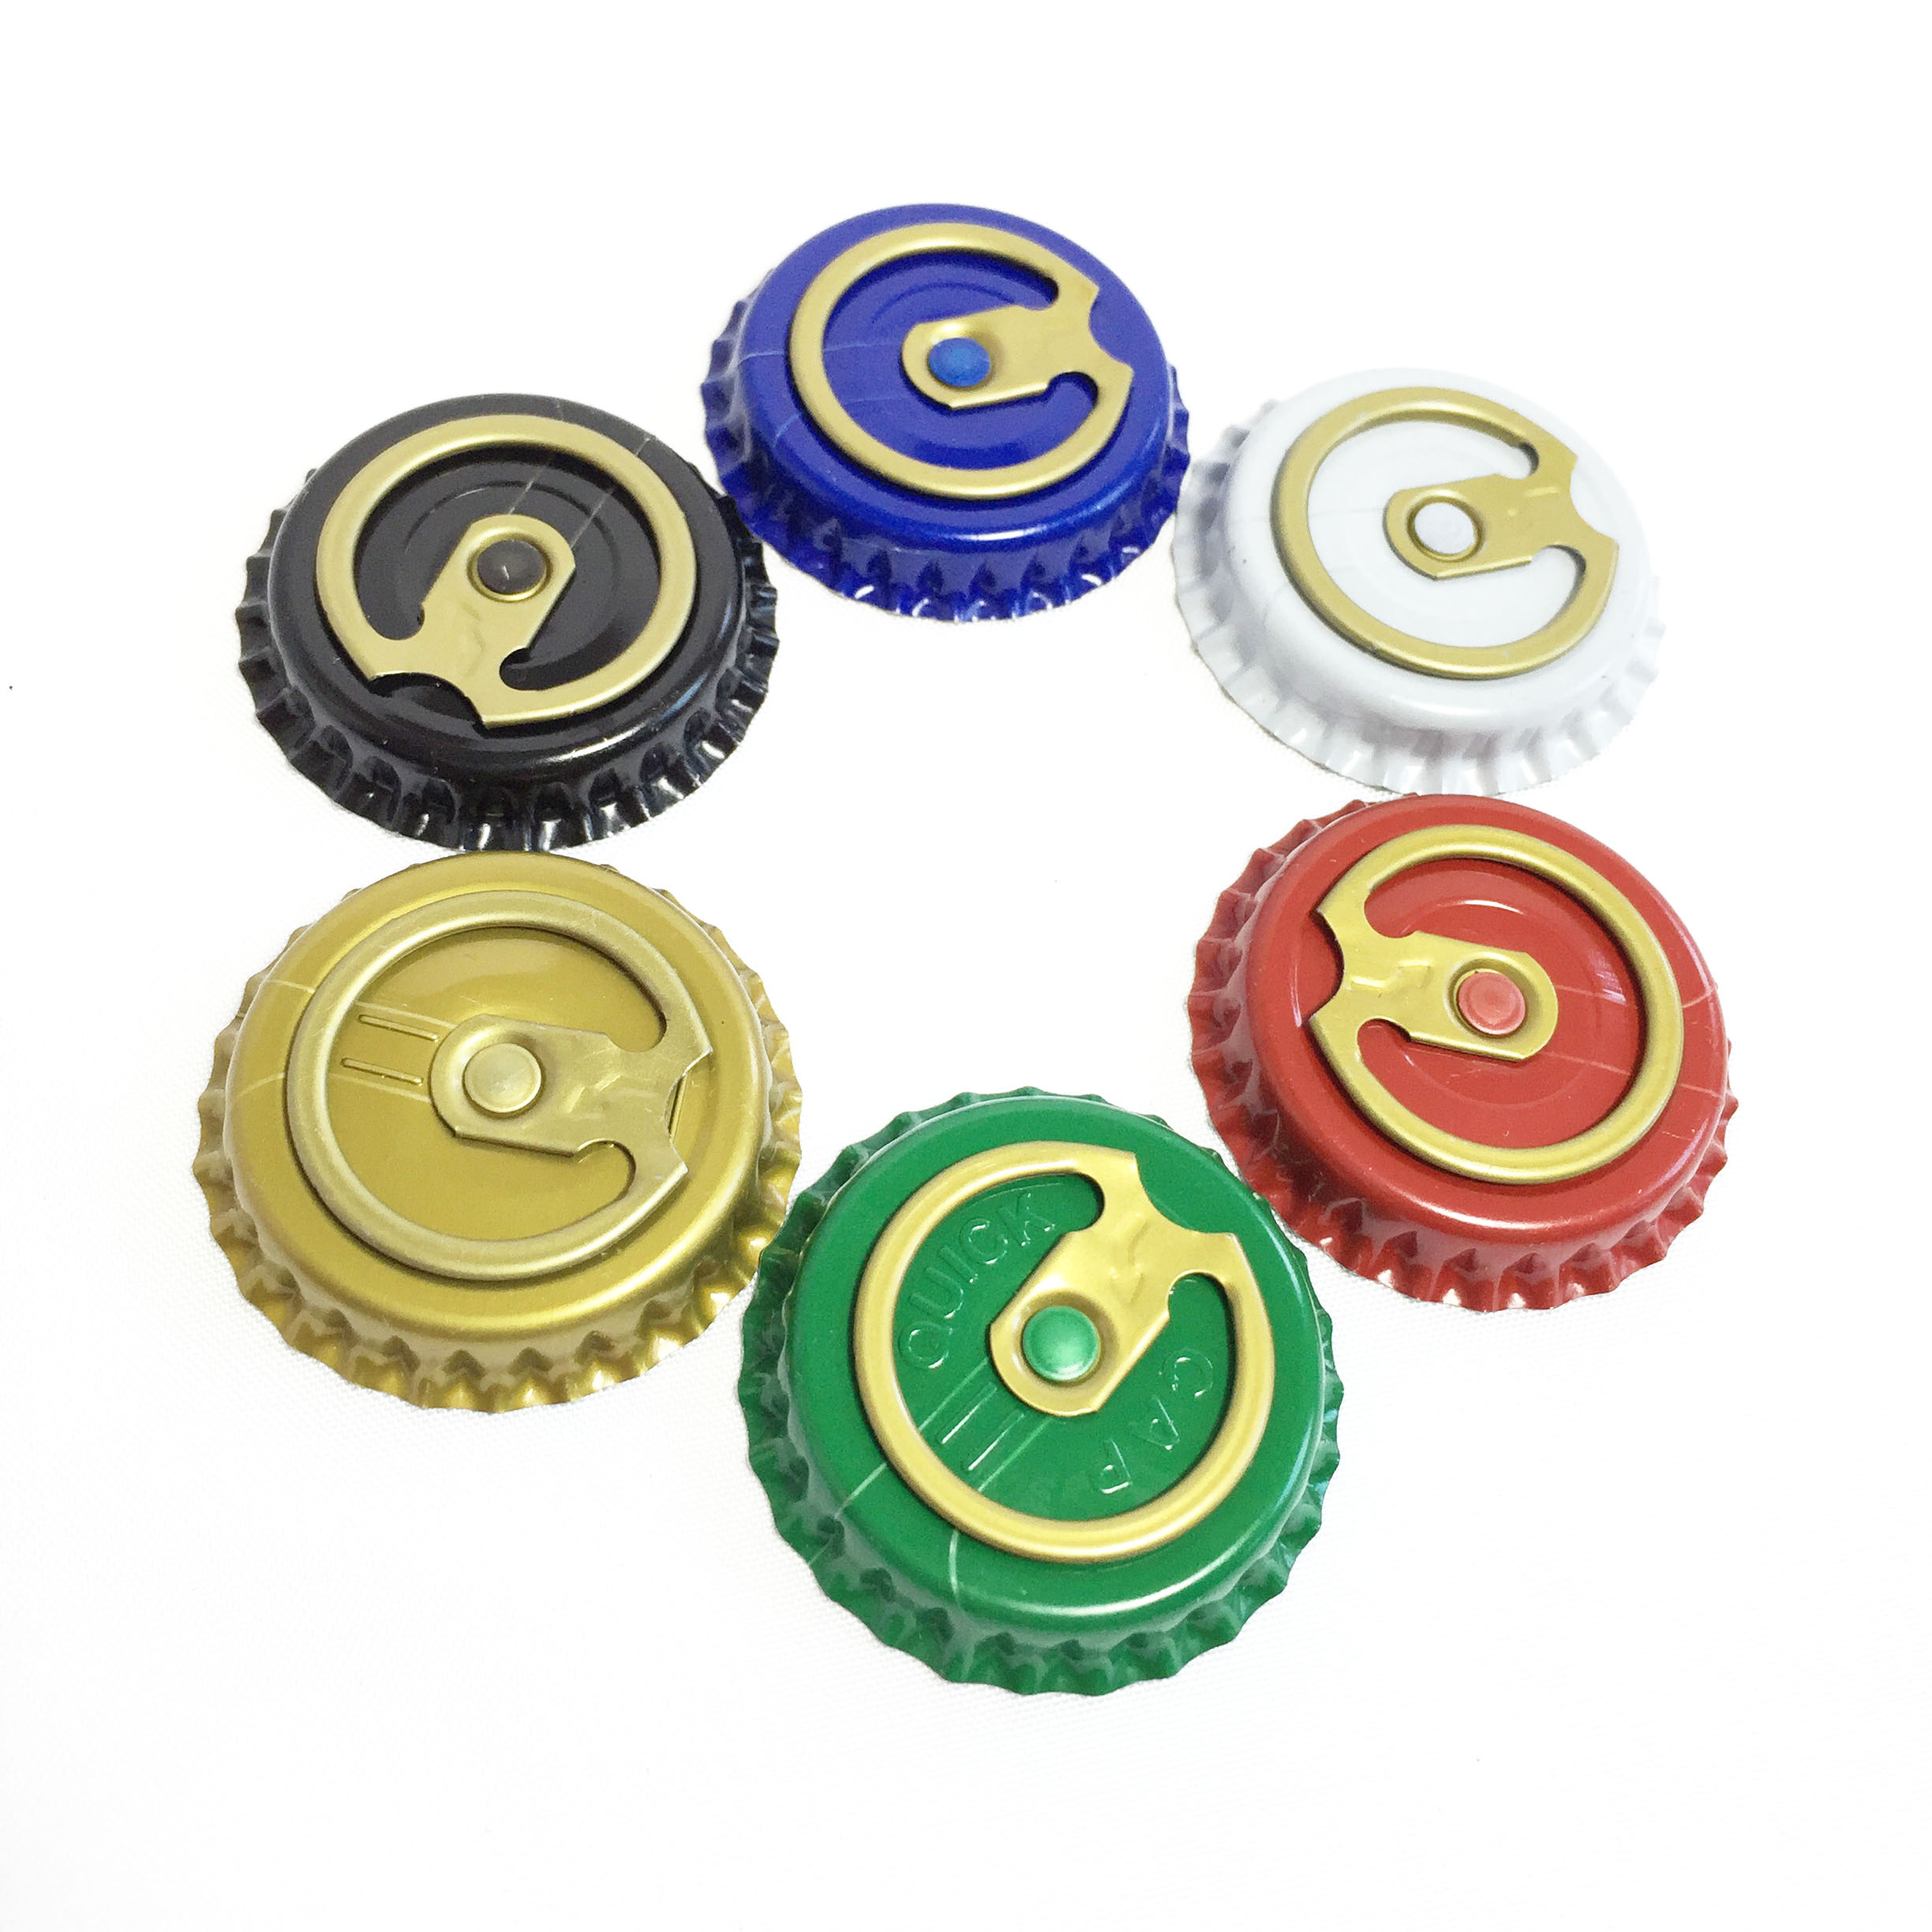 26mm easy open crown ring pull cap